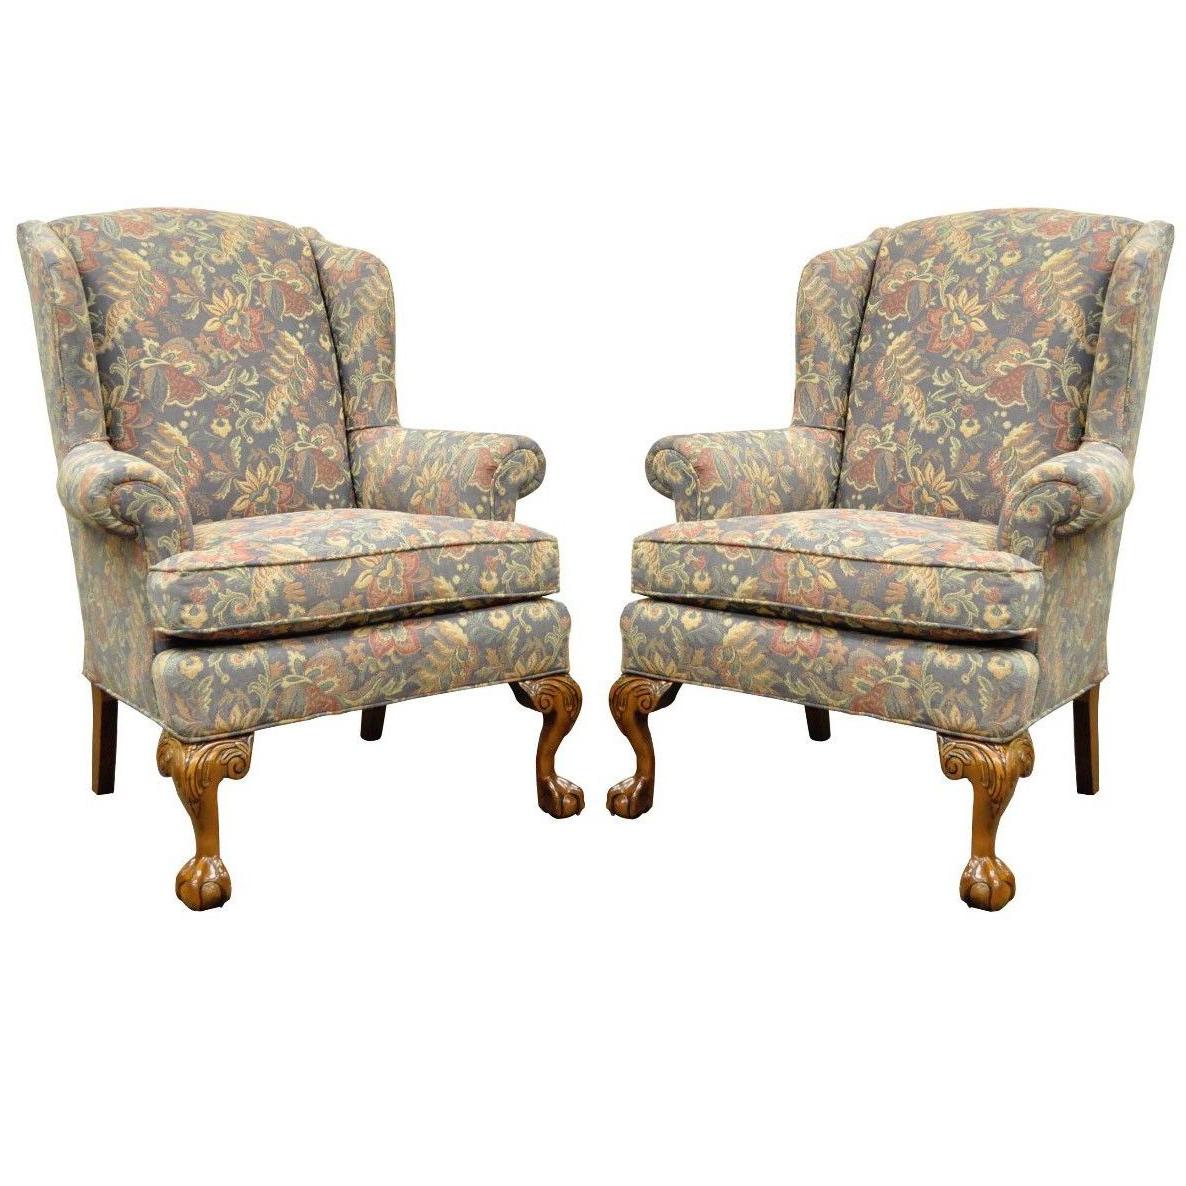 Pair of Vintage American of High Point Chippendale Ball & Claw Wing Back Chairs